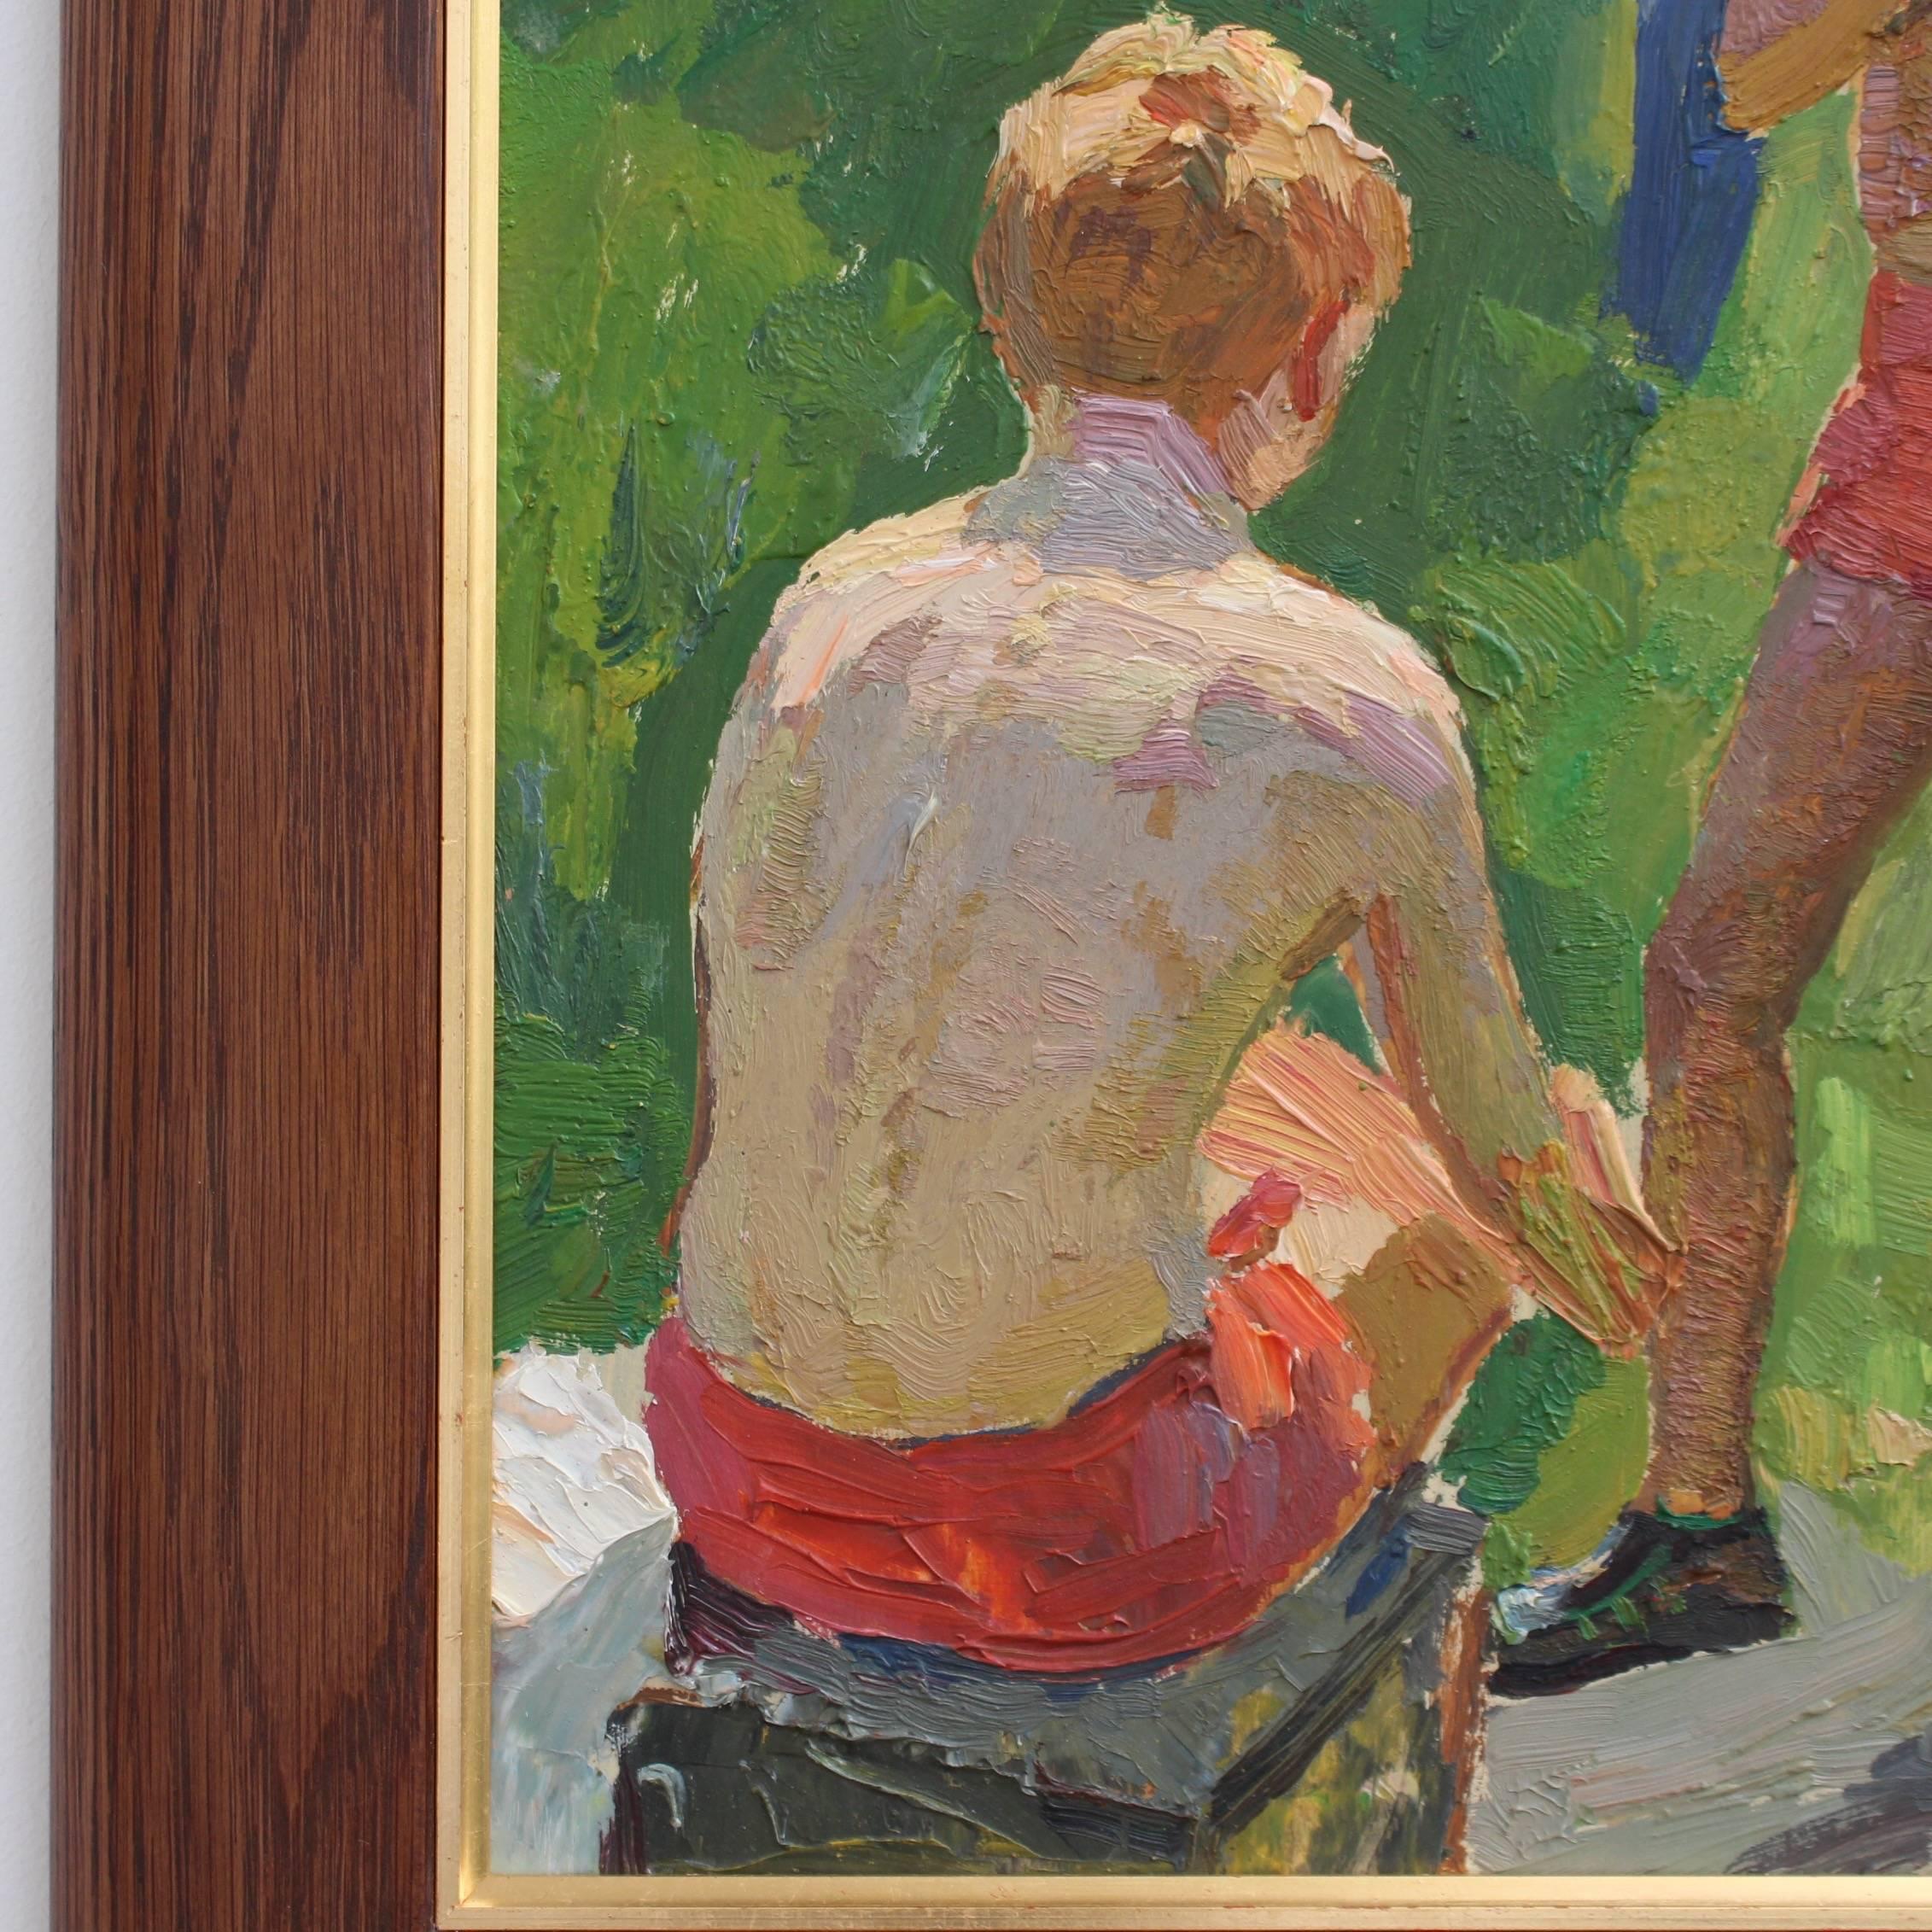 Boys in Summertime - Brown Figurative Painting by Unknown